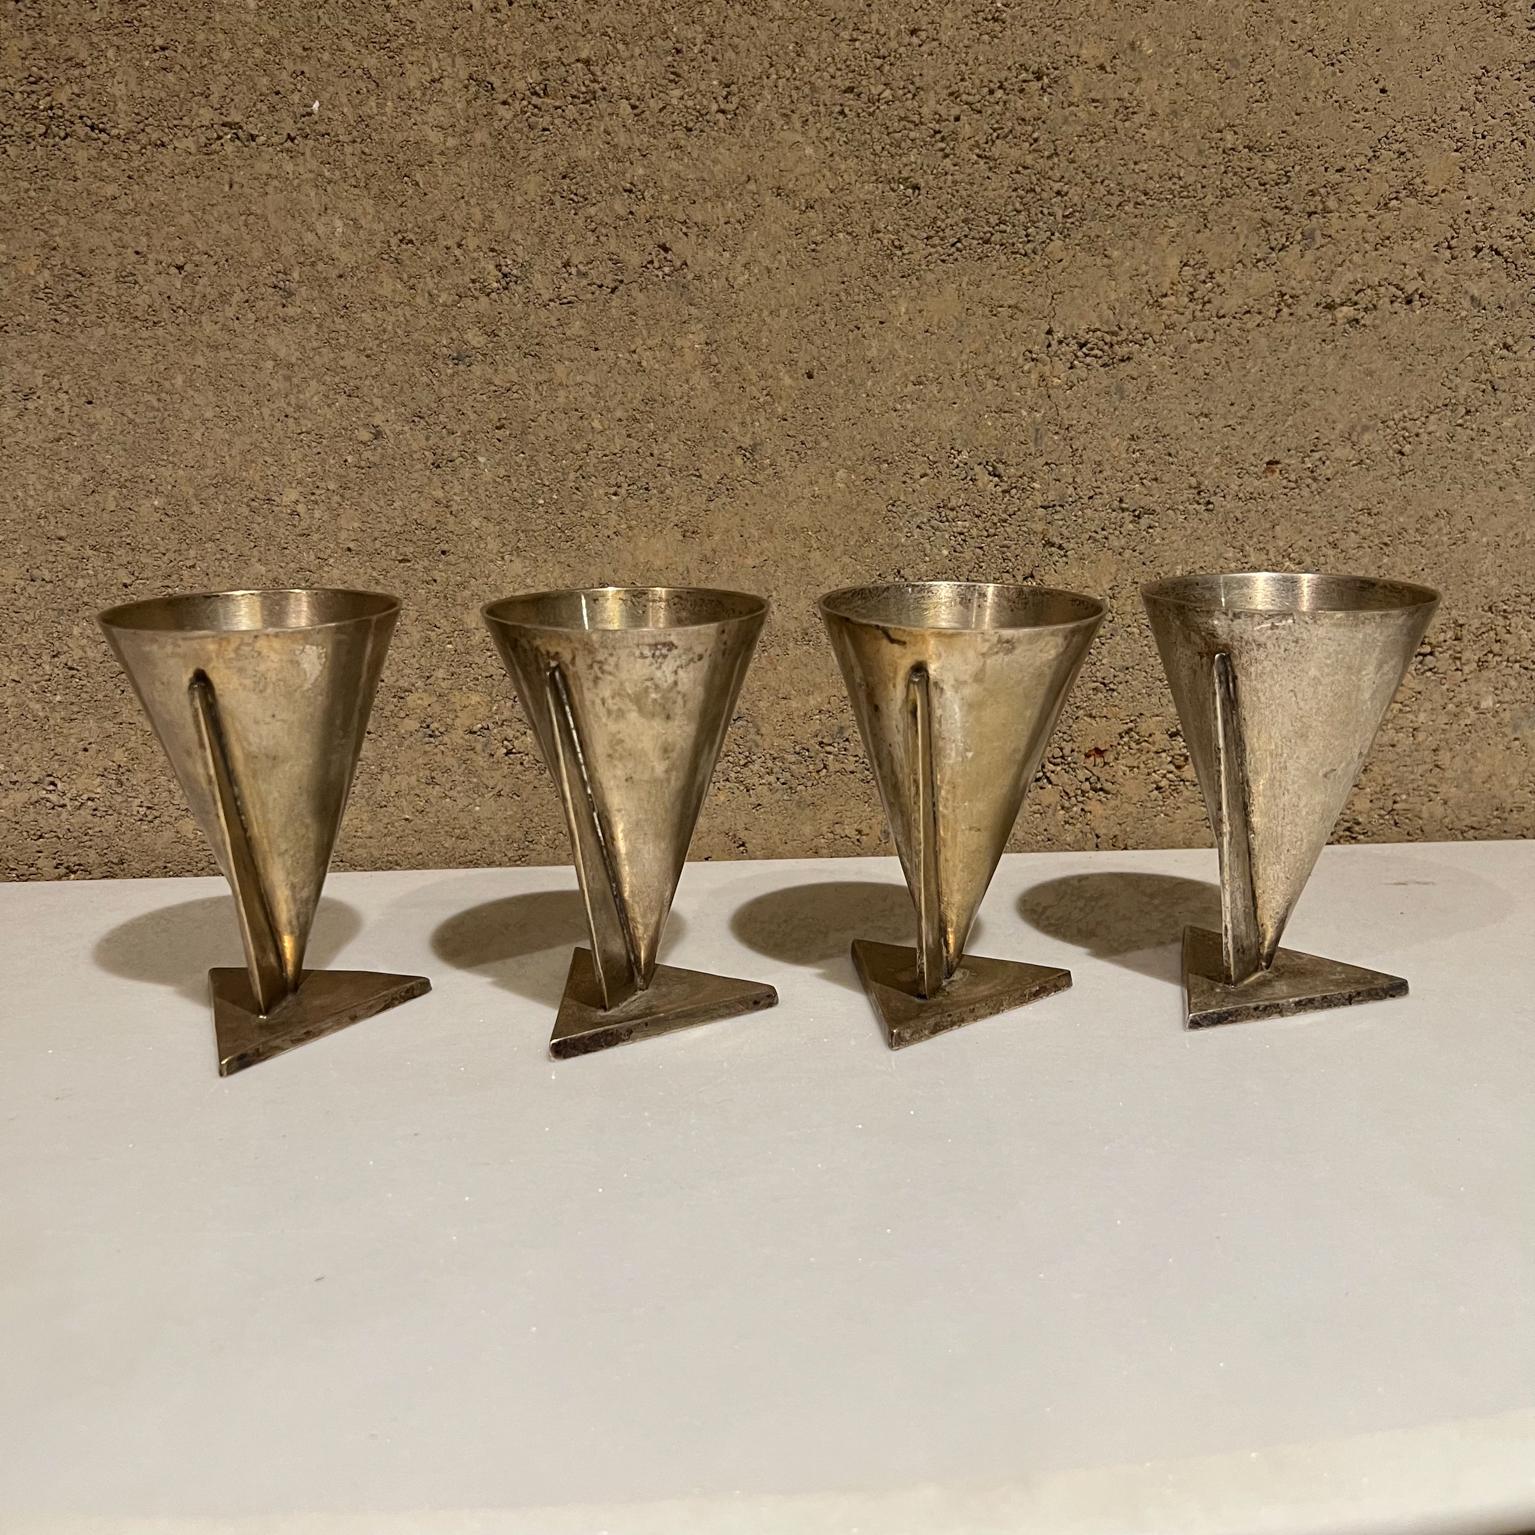 1920s La Maison Desny Modernist French Art Deco set of four silver plate cups Paris.
Art Deco Era measures 4.38 tall x 2.88 
No label remains.
Preowned original unrestored vintage condition.
See images provided please.
 